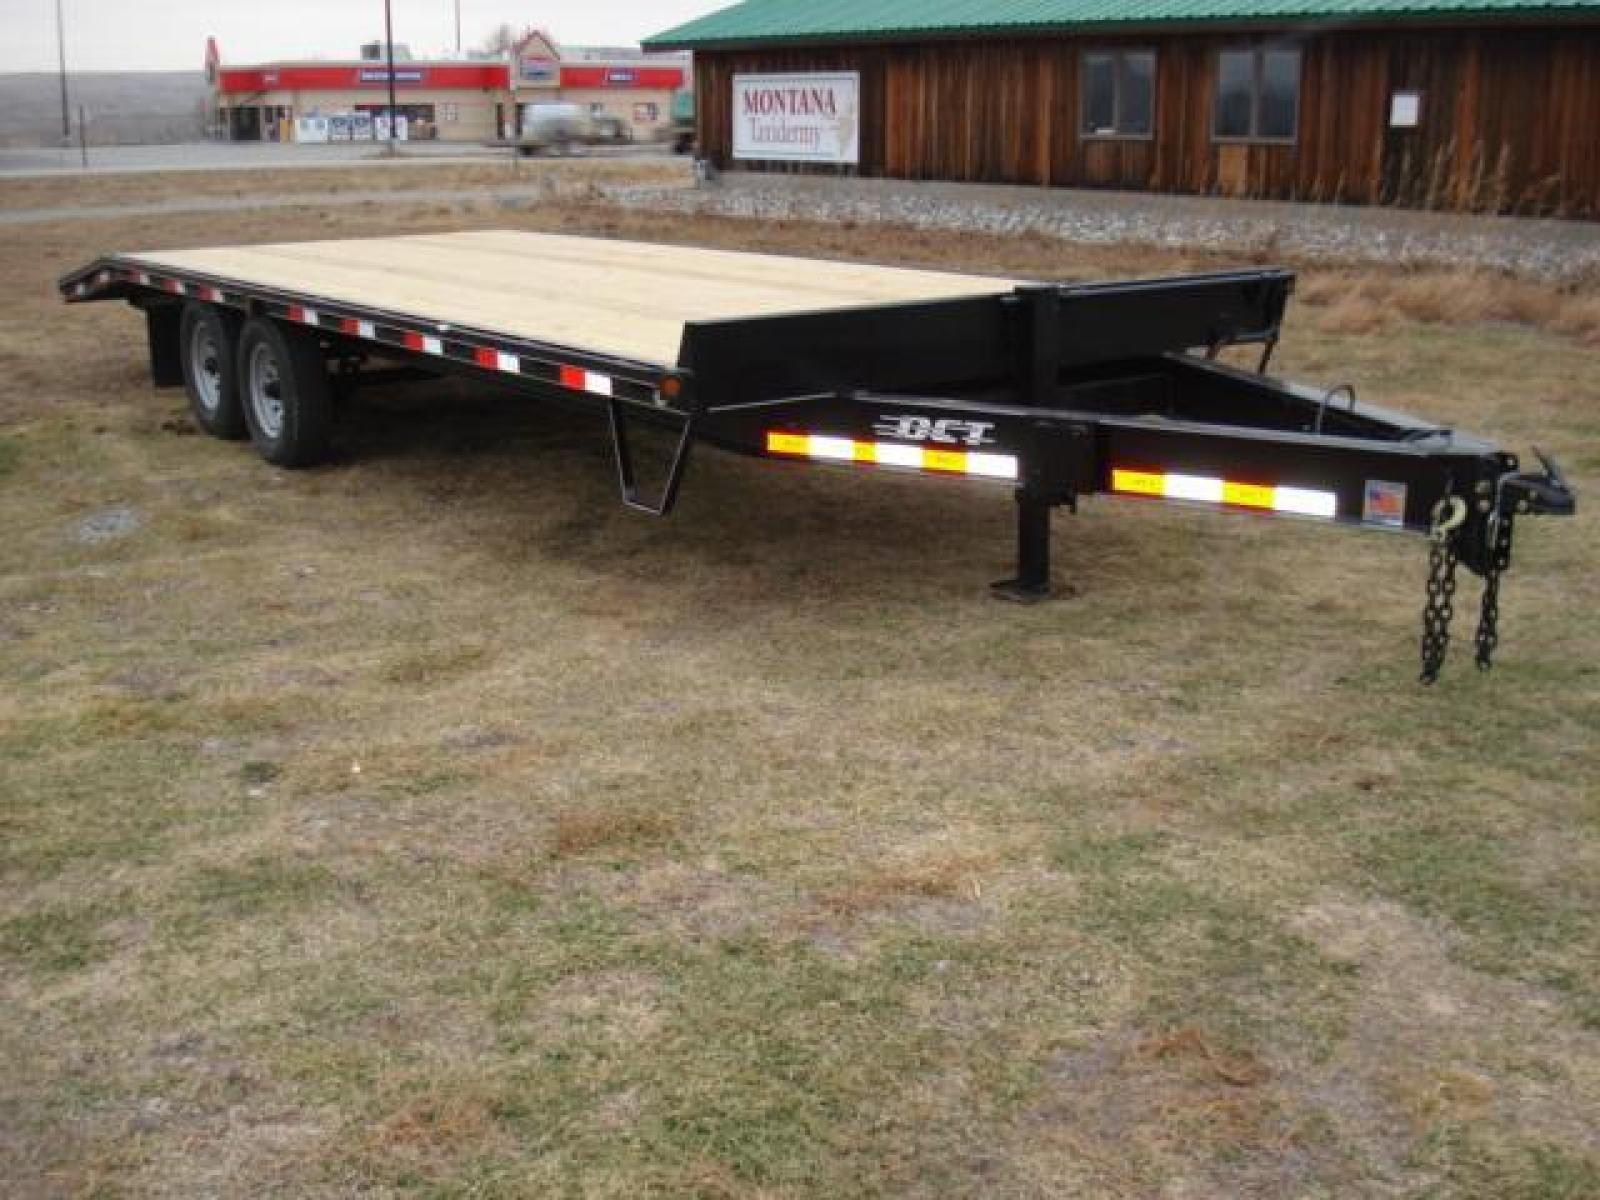 2022 Black DCT 81/2 x 20 + 4 Deckover Equip , located at 310 West 1st Ave, Big Timber, MT, 59011, (406) 860-8510, 45.833511, -109.957809 - DCT 81/2 X 20 + 4 DECKOVER BUMPER-PULL EQUIPMENT TRAILER, 4' DOVETAIL, 14K GVW, 2 - 7K AXLES W- EZ LUBE HUBS, HD SLIPPER SPRING SUSPENSION, 16"-10 PLY TIRES, 16" ON CENTER CROSS MEMBERS, LED LIGHTS, TREATED DECK, REAR RAMPS, 2-5-16 ADJUSTABLE COUPLER, 12K DROP FOOT JACK, STAKE POCKETS-RUB RAIL. T - Photo #2